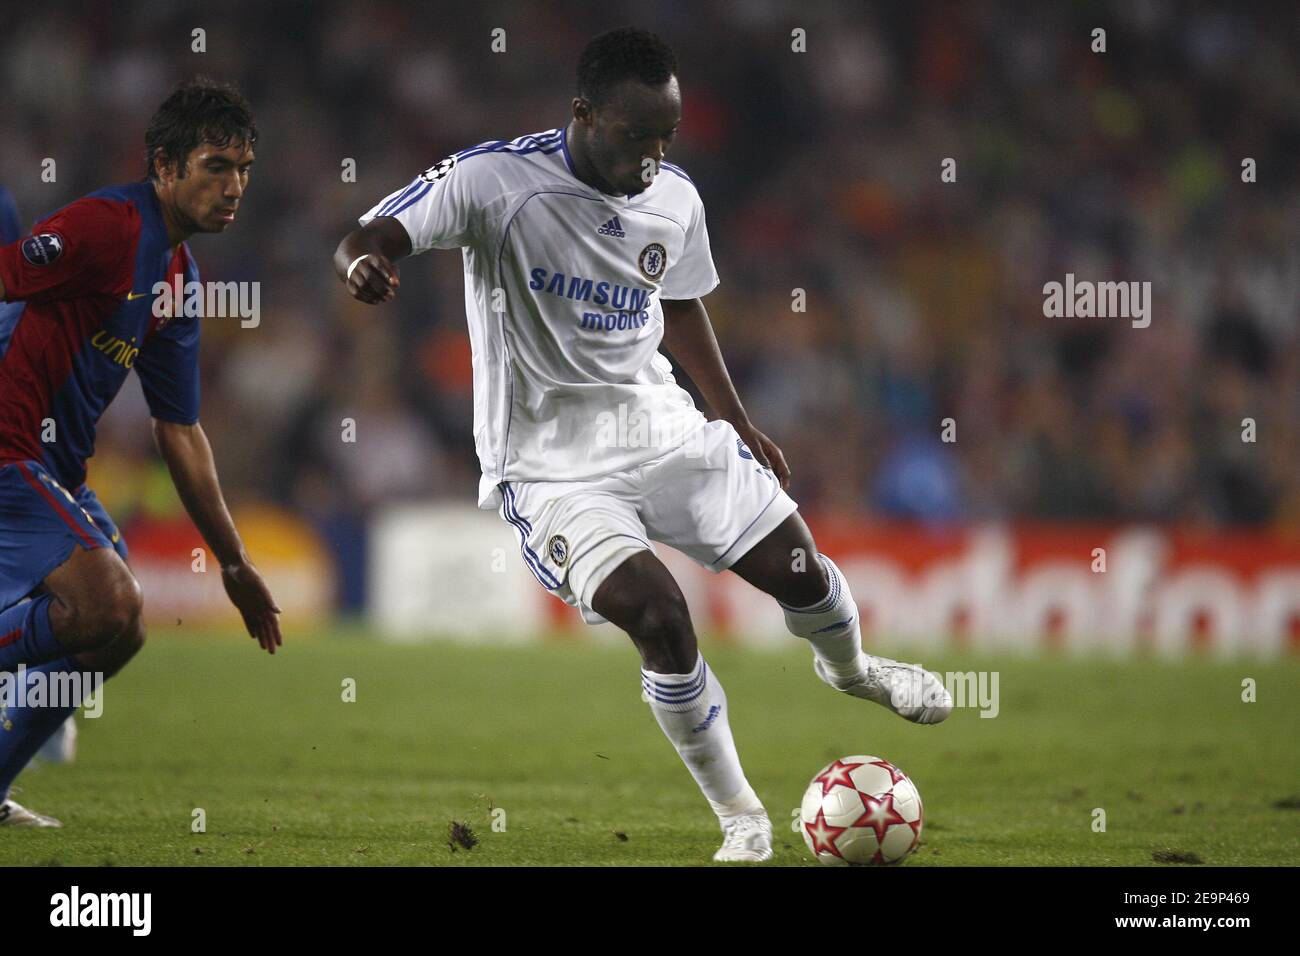 Chelsea's Michael Essien in action during the UEFA Champions League, Group A, Barcelona vs Chelsea at the Camp Nou stadium in Barcelona, Spain on October 31, 2006. The match ended in a 2-2 draw. Photo by Christian Liewig/ABACAPRESS.COM Stock Photo